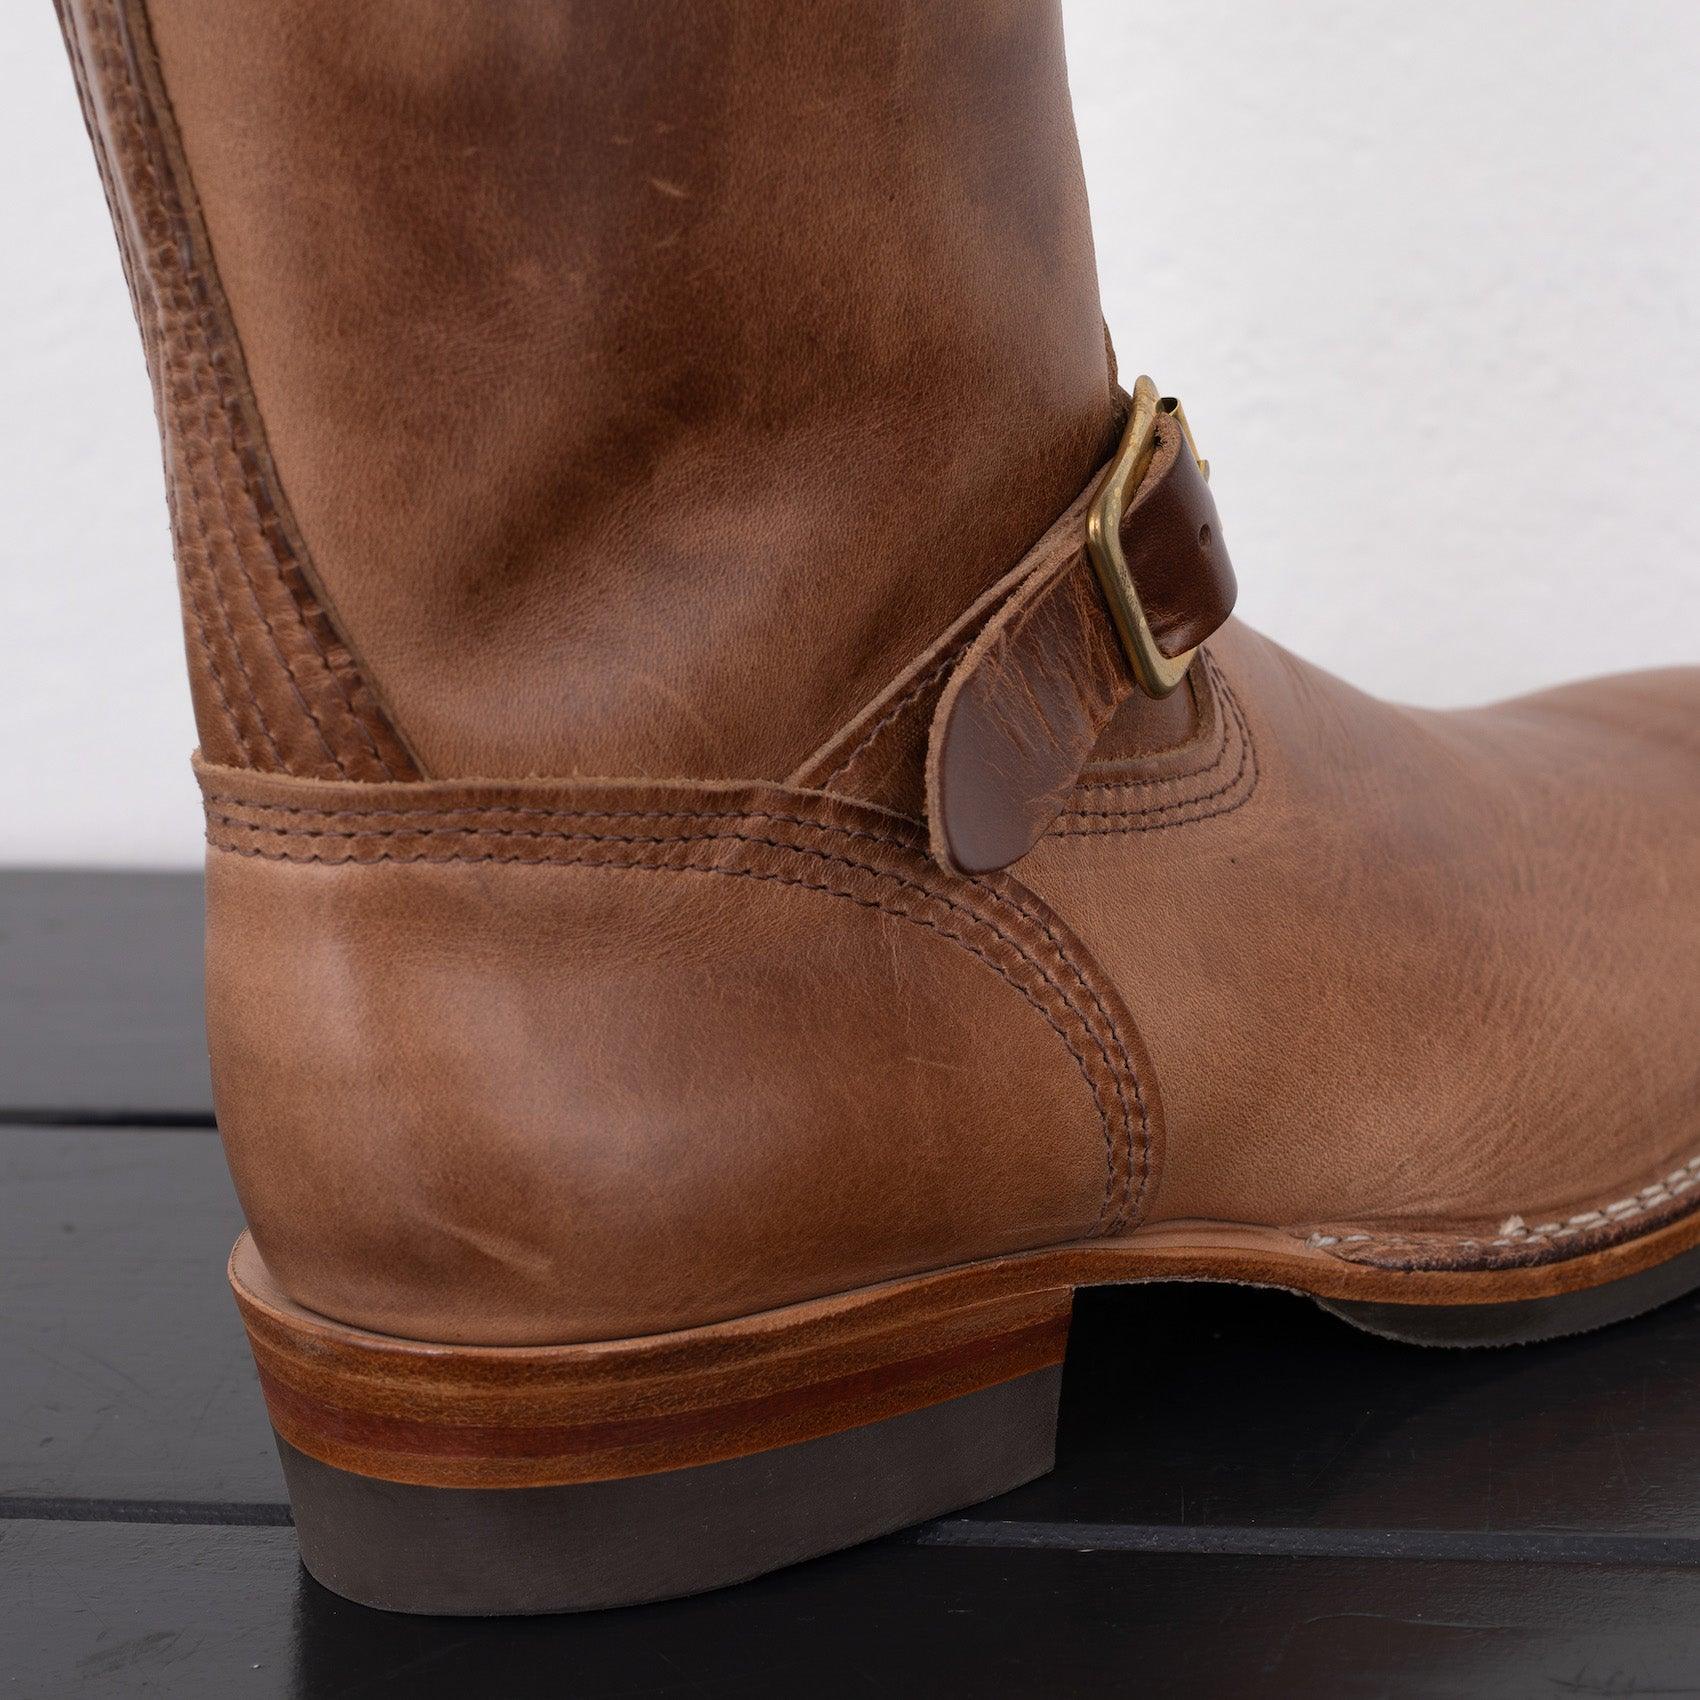 Image showing the WE-7600NATCXL-NAT - WESCO "Mister Lou" Engineer - Natural which is a Boots described by the following info Boots, Footwear, Released, Wesco and sold on the IRON HEART GERMANY online store